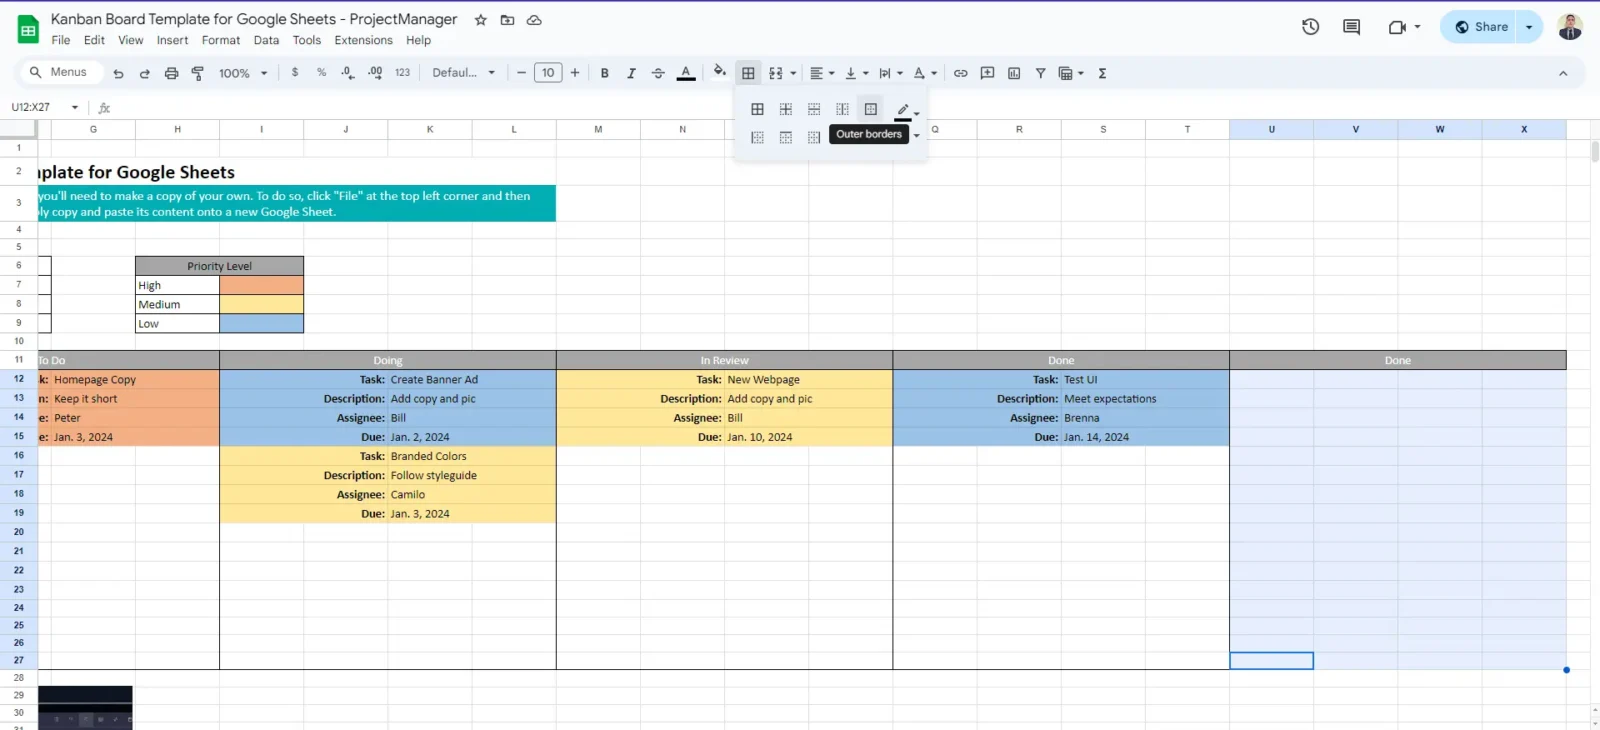 adding an extra column to the kanban board for Google Sheets